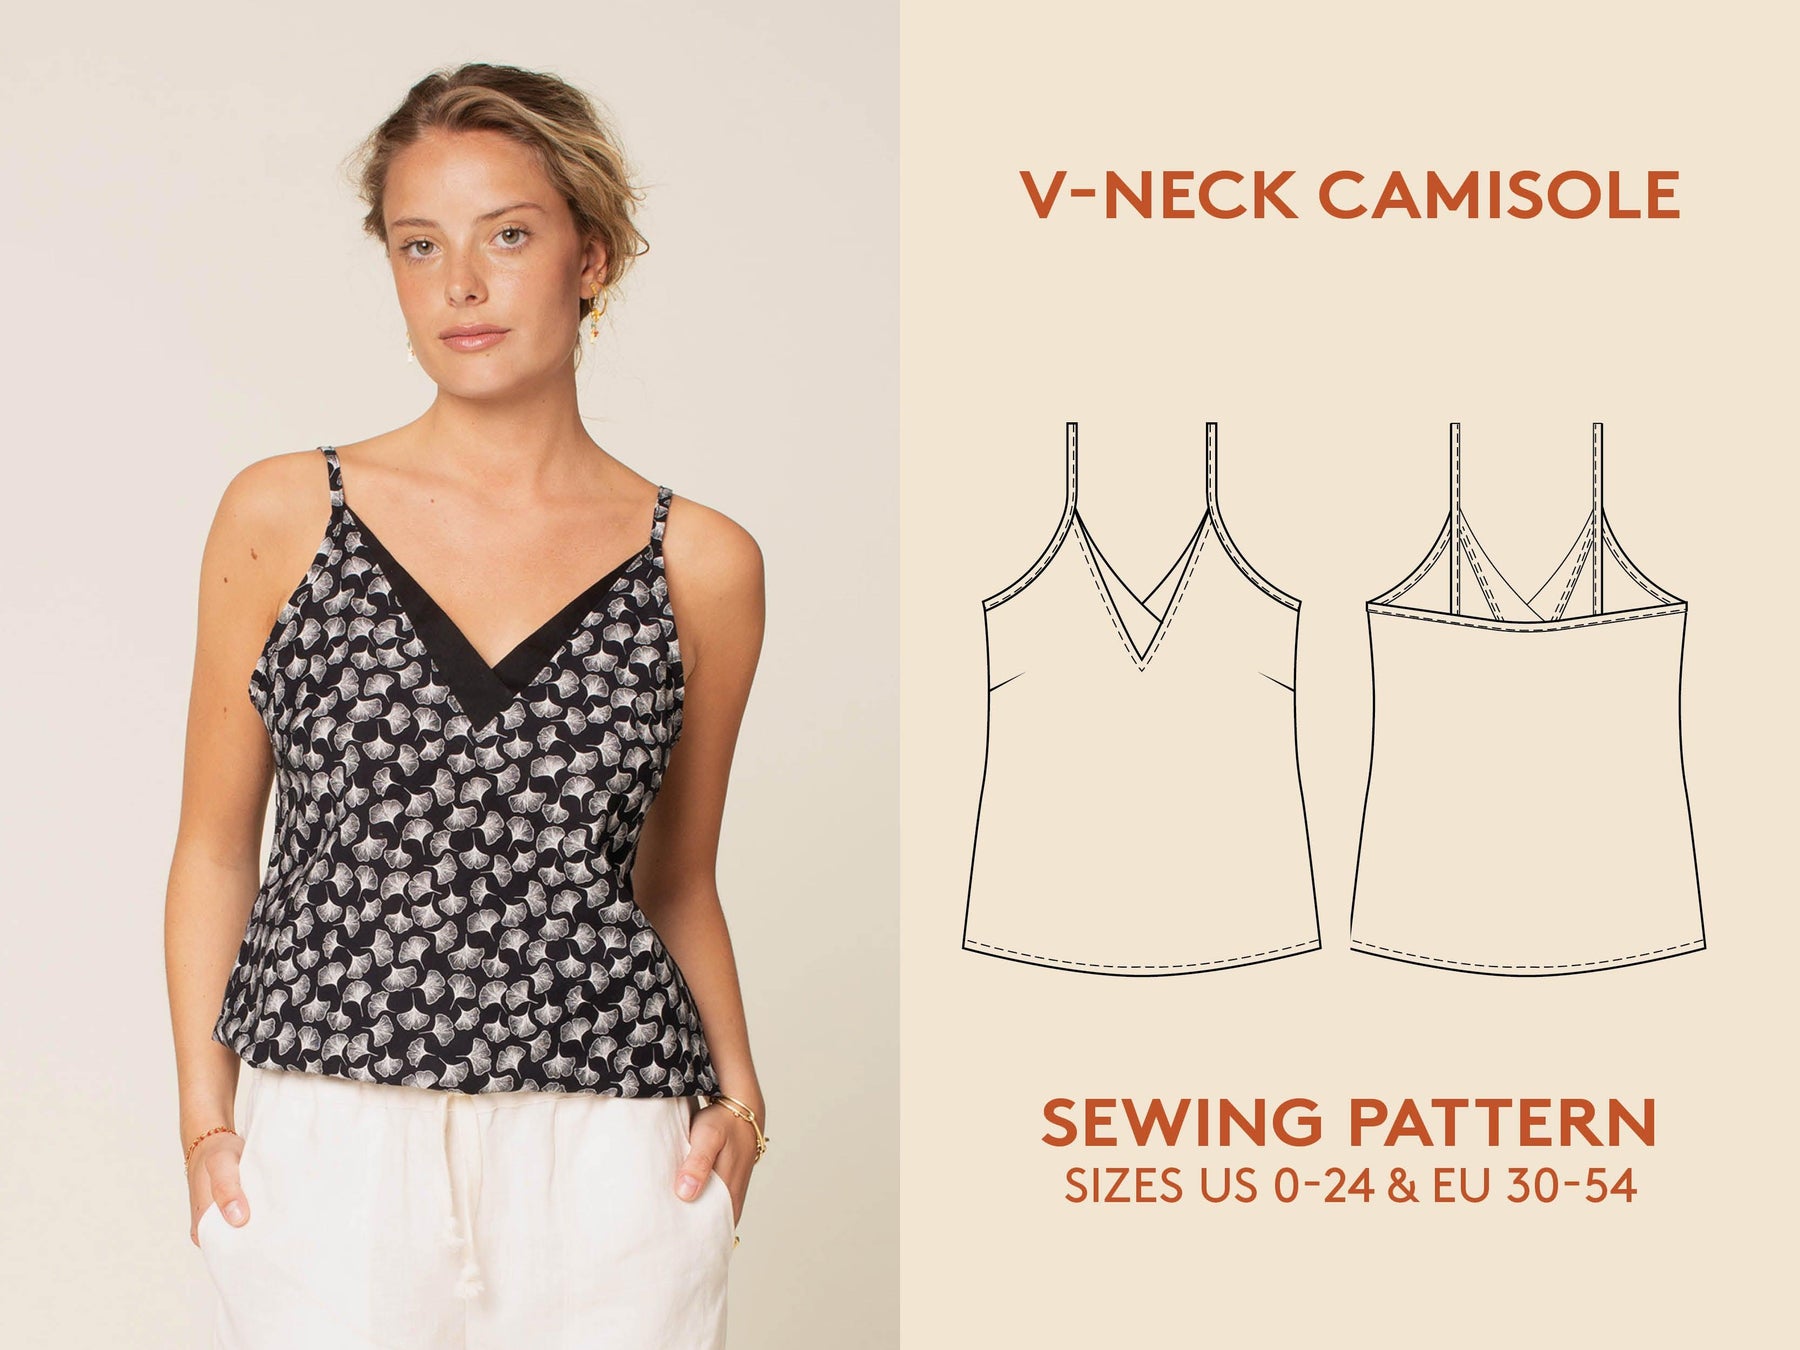 V-neck Camisole sewing pattern | Wardrobe By Me - We love sewing!